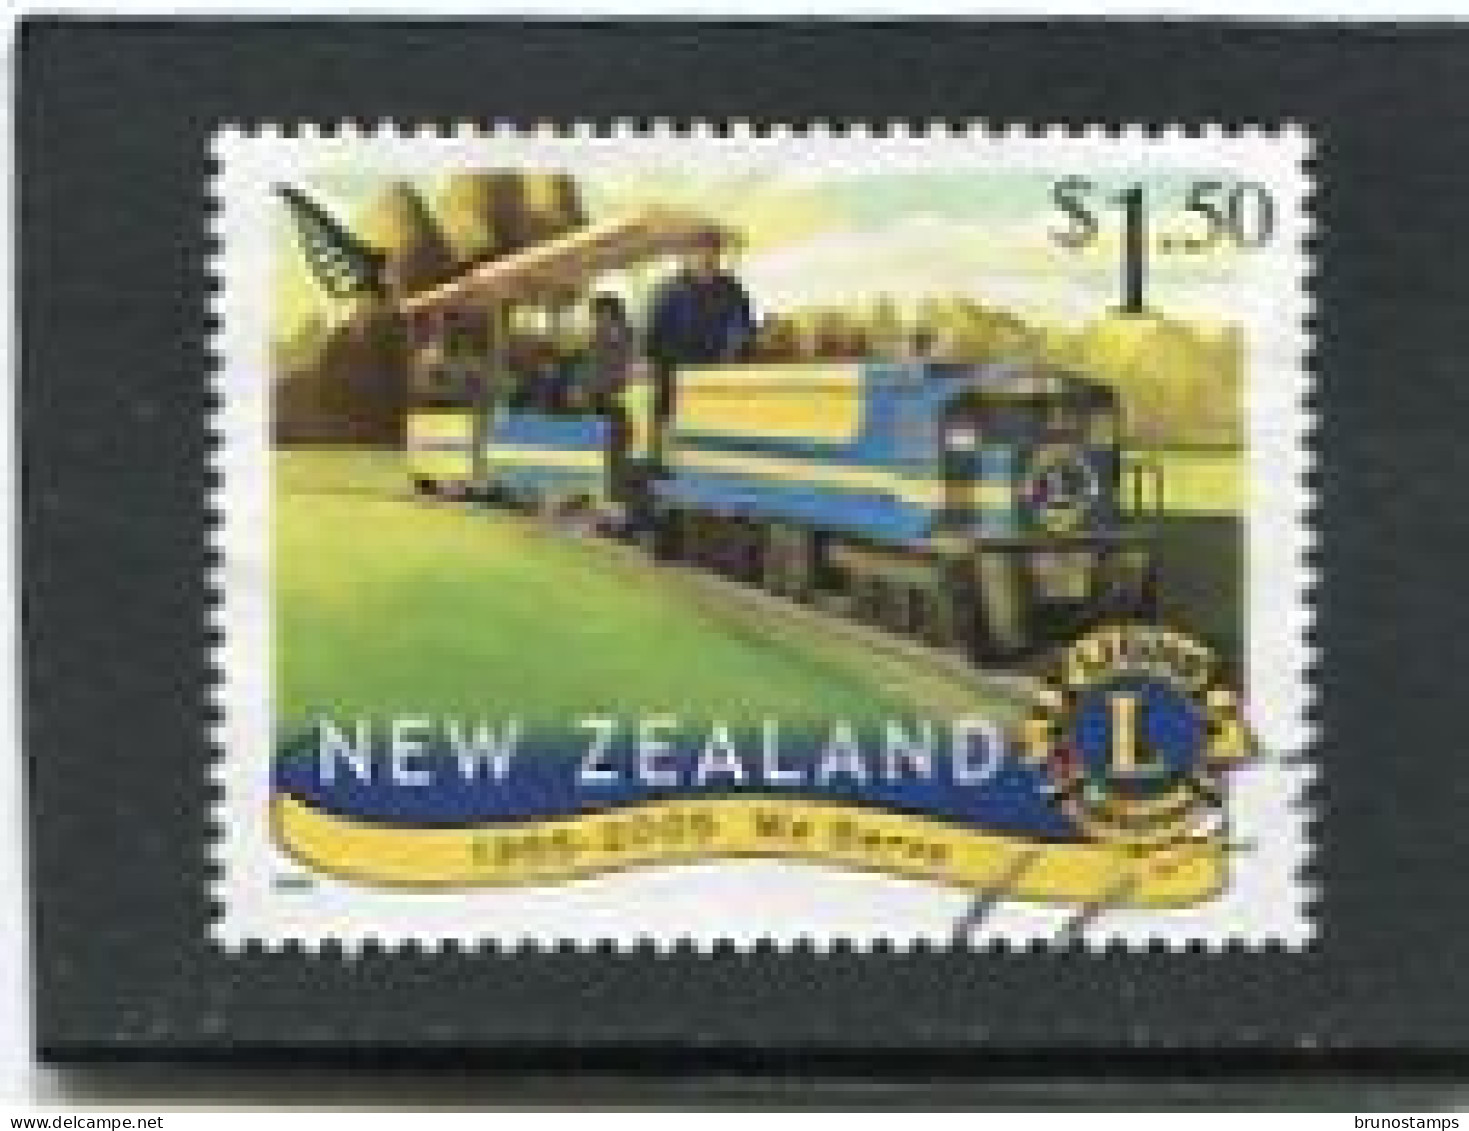 NEW ZEALAND - 2005  1.50$   LIONS   FINE  USED - Used Stamps